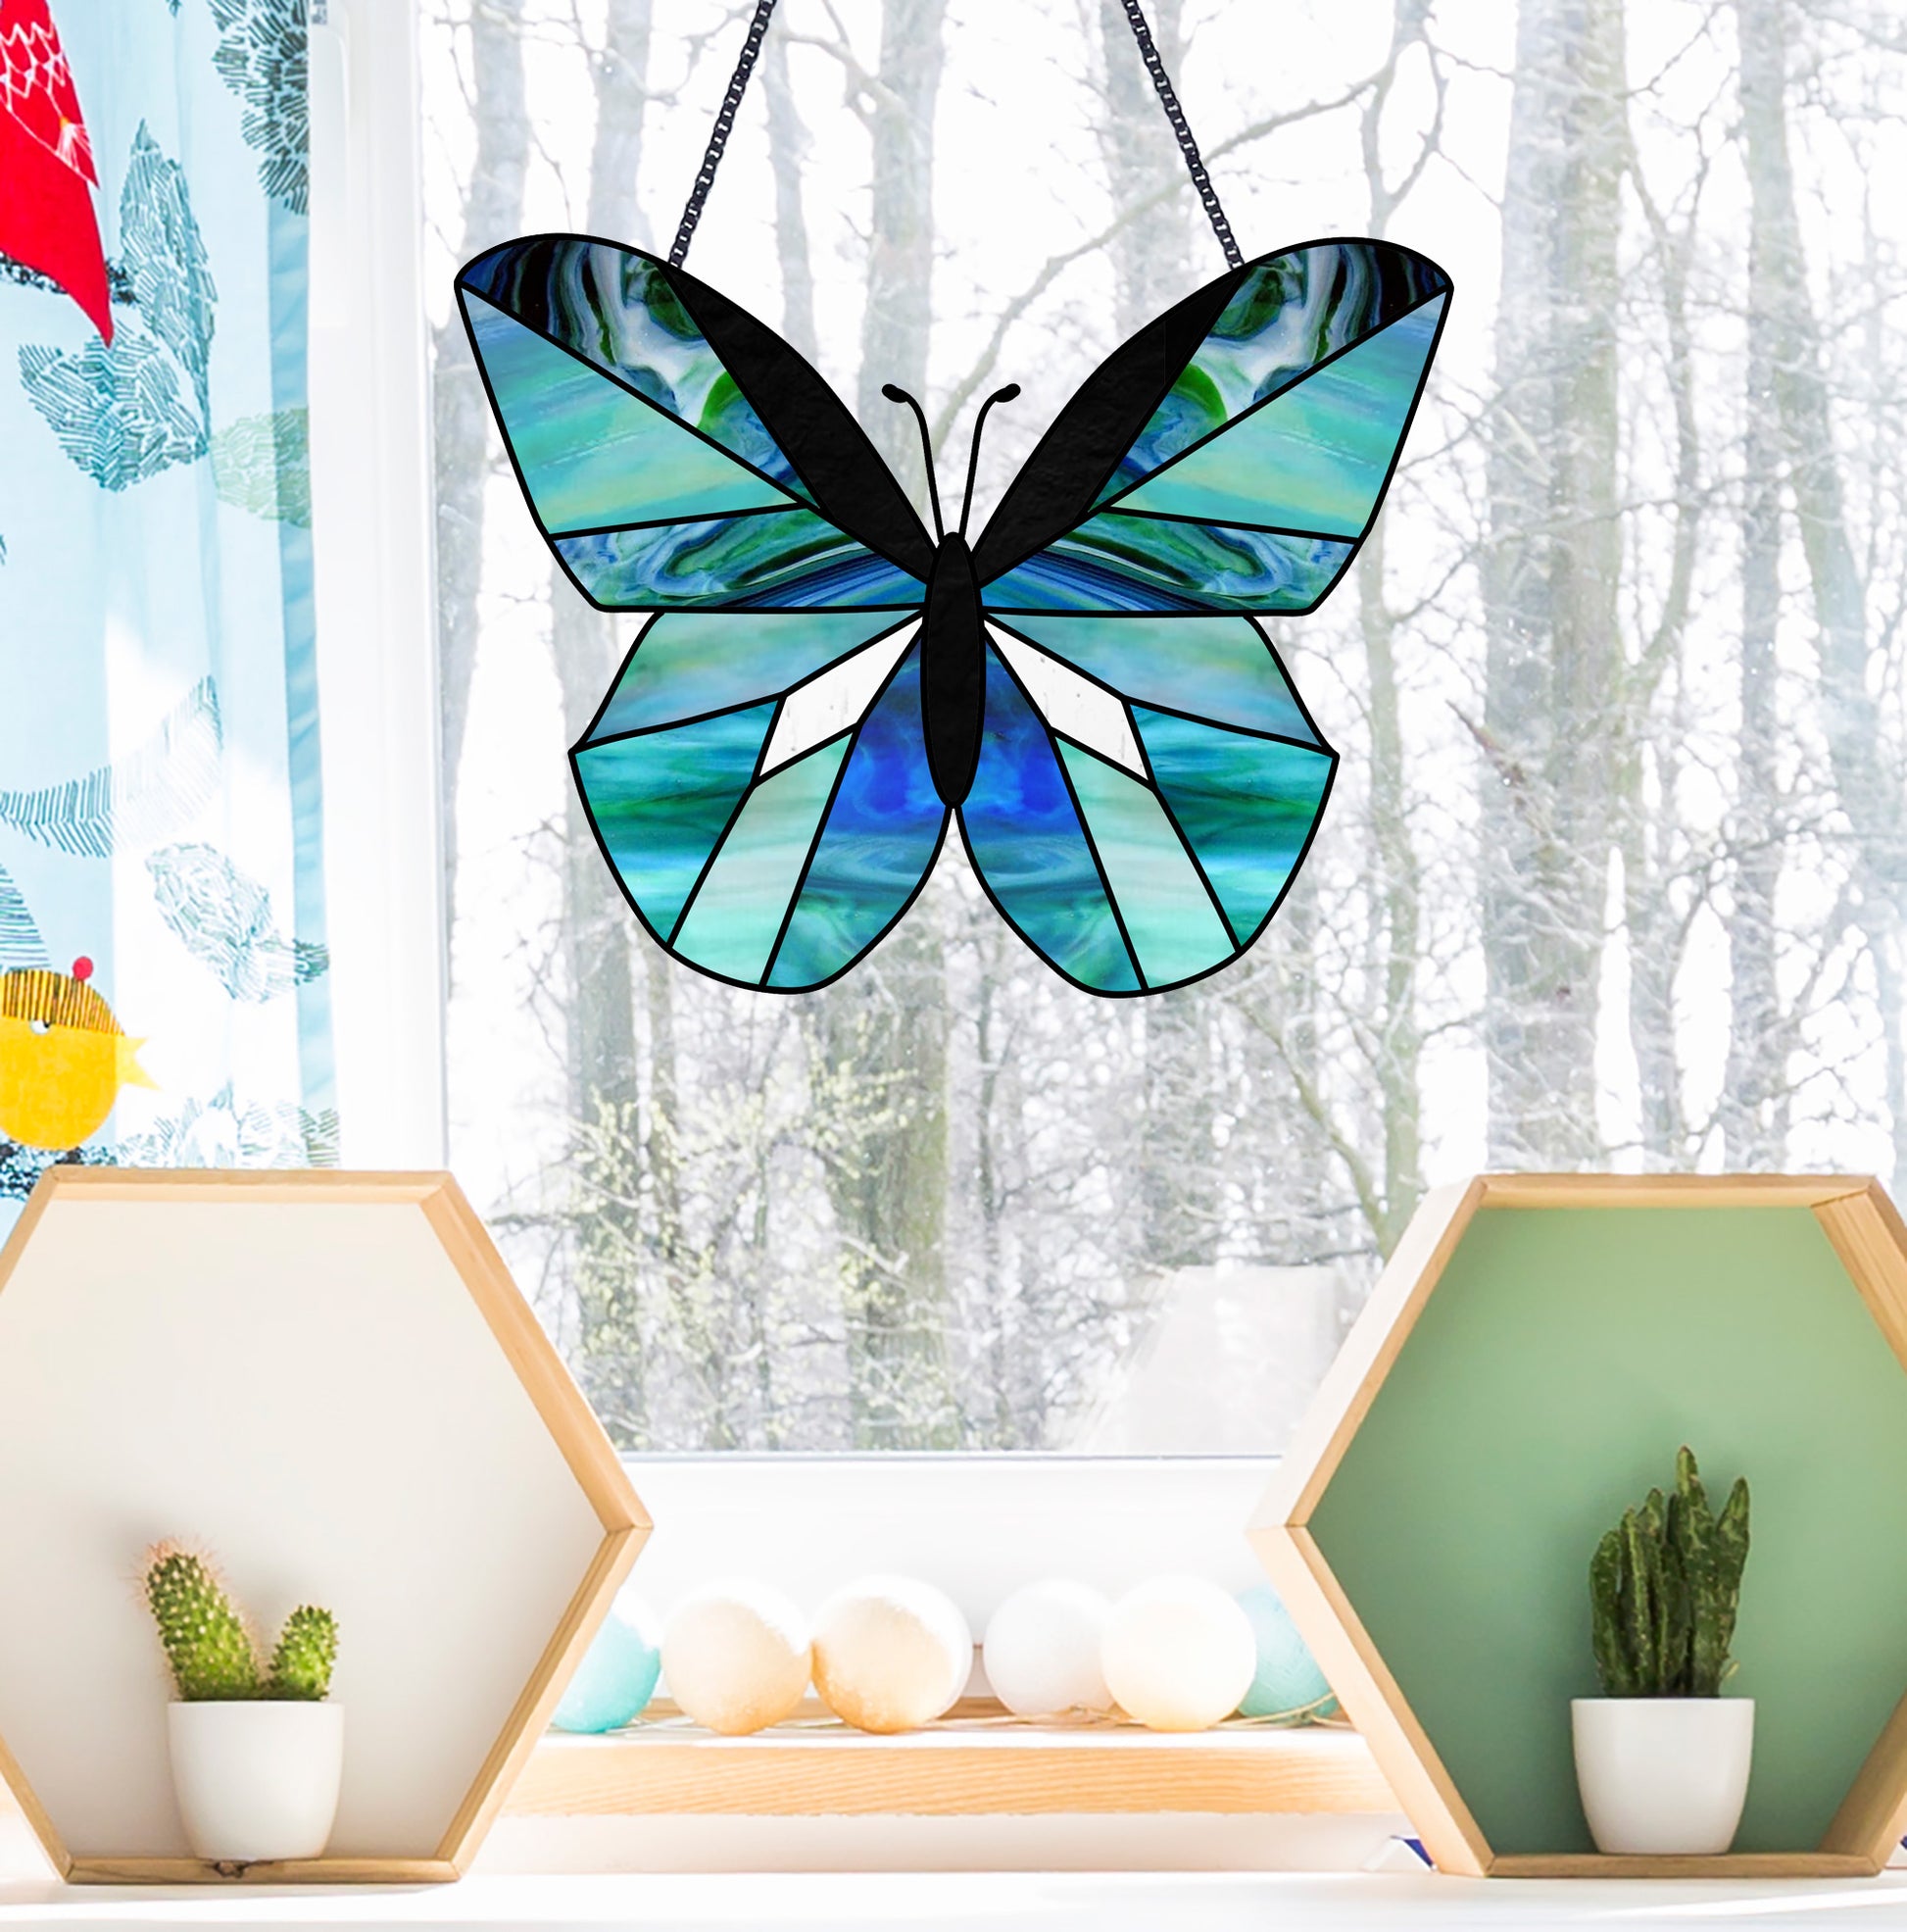 The Beginner's Guide to Gel Stain - A Butterfly House